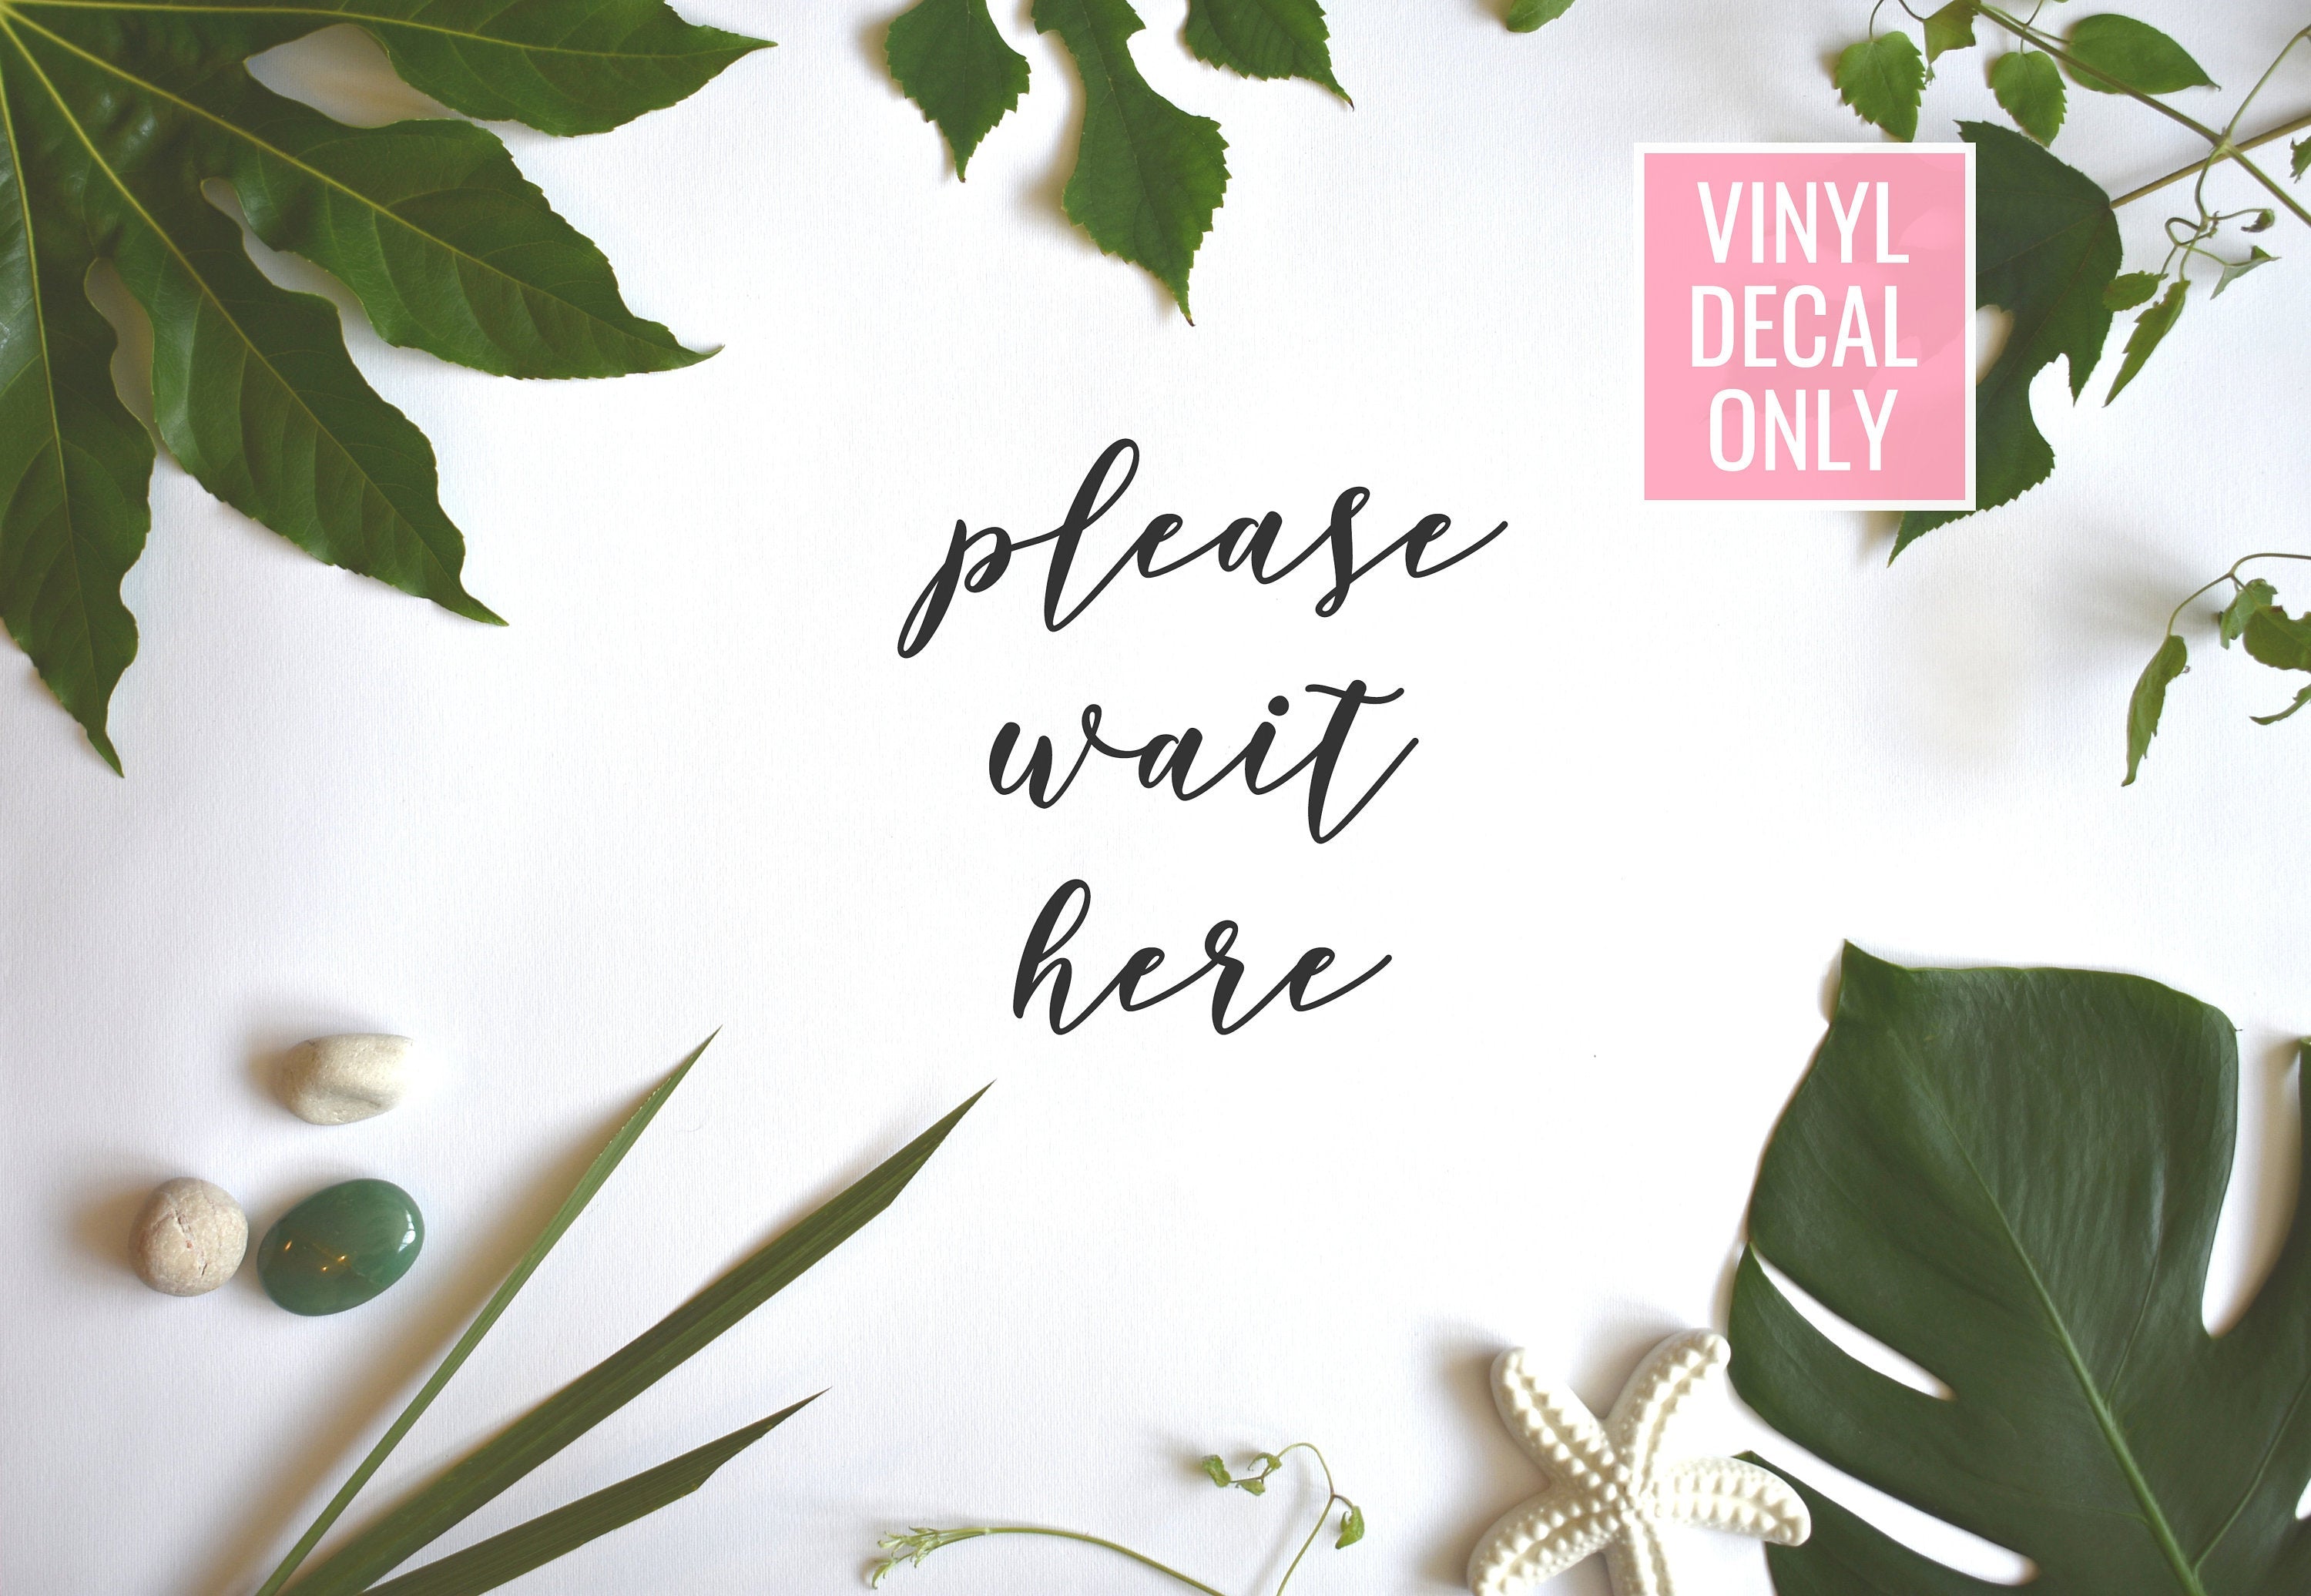 Please Wait Here Decal - Vinyl Decal for Shops, Spa, Hair Salon, Barber Shop, Restaurants, Businesses, and More!